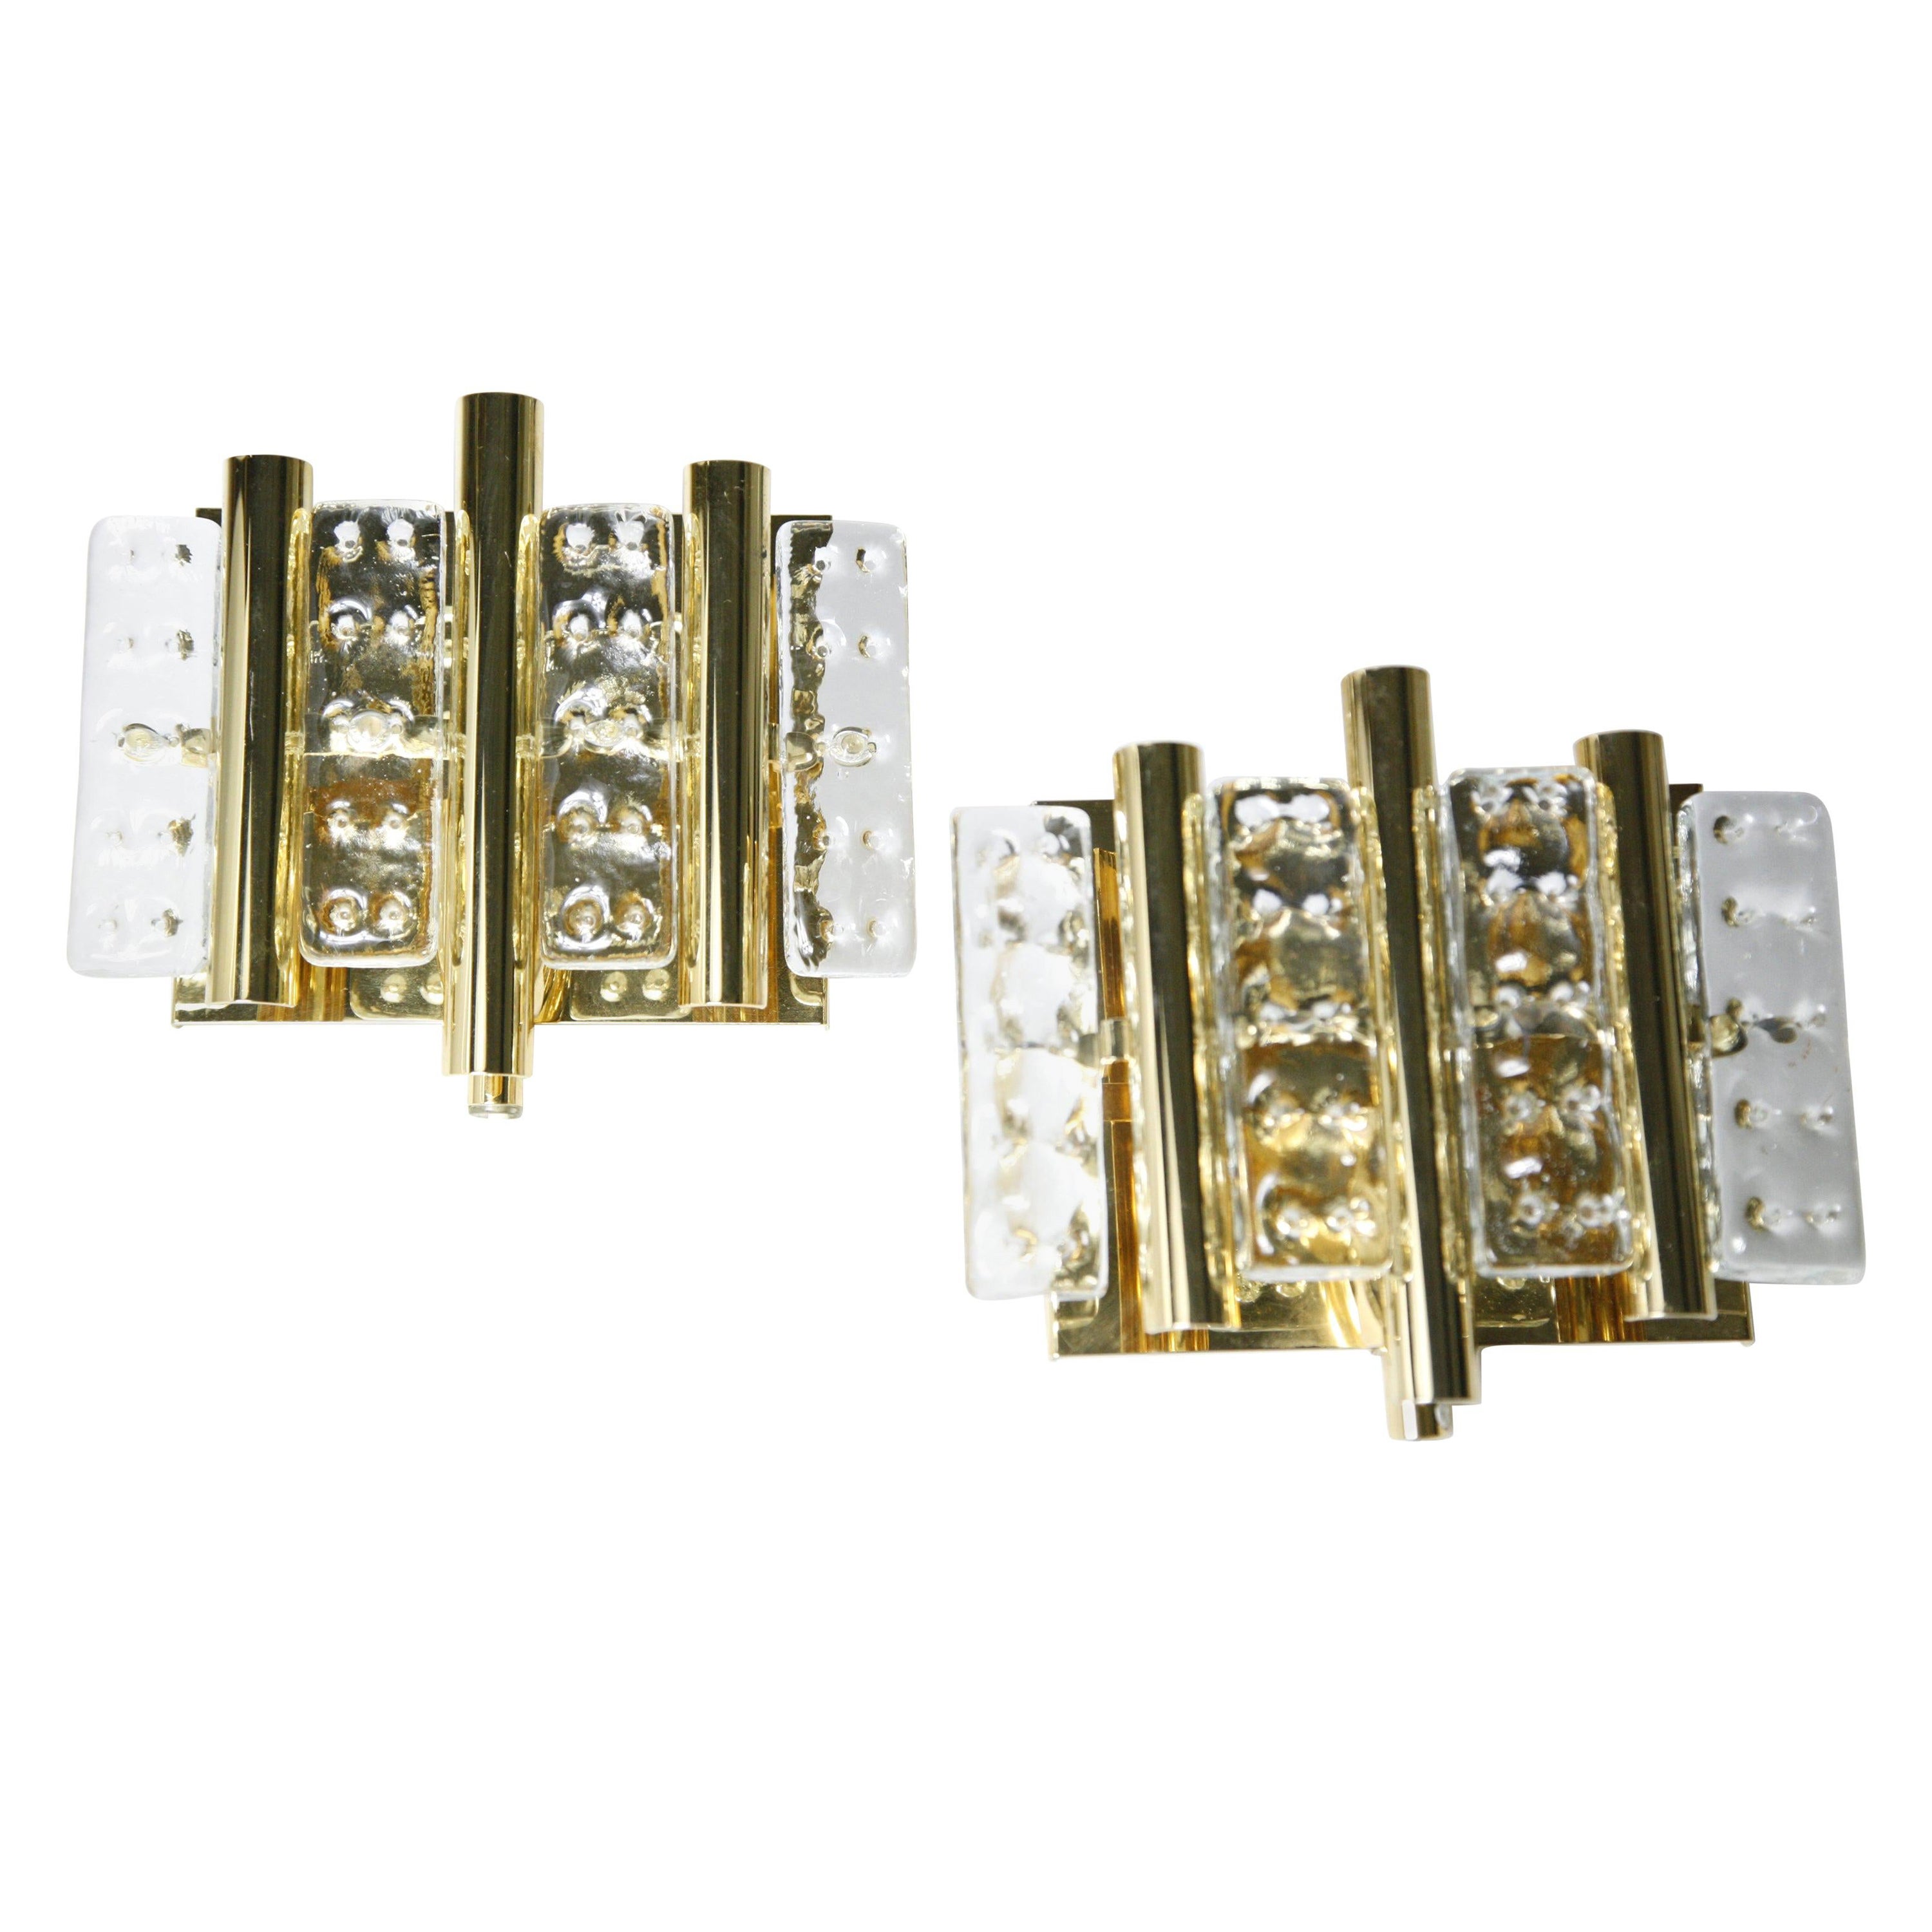 Flygsfors Wall Lights and Sconces